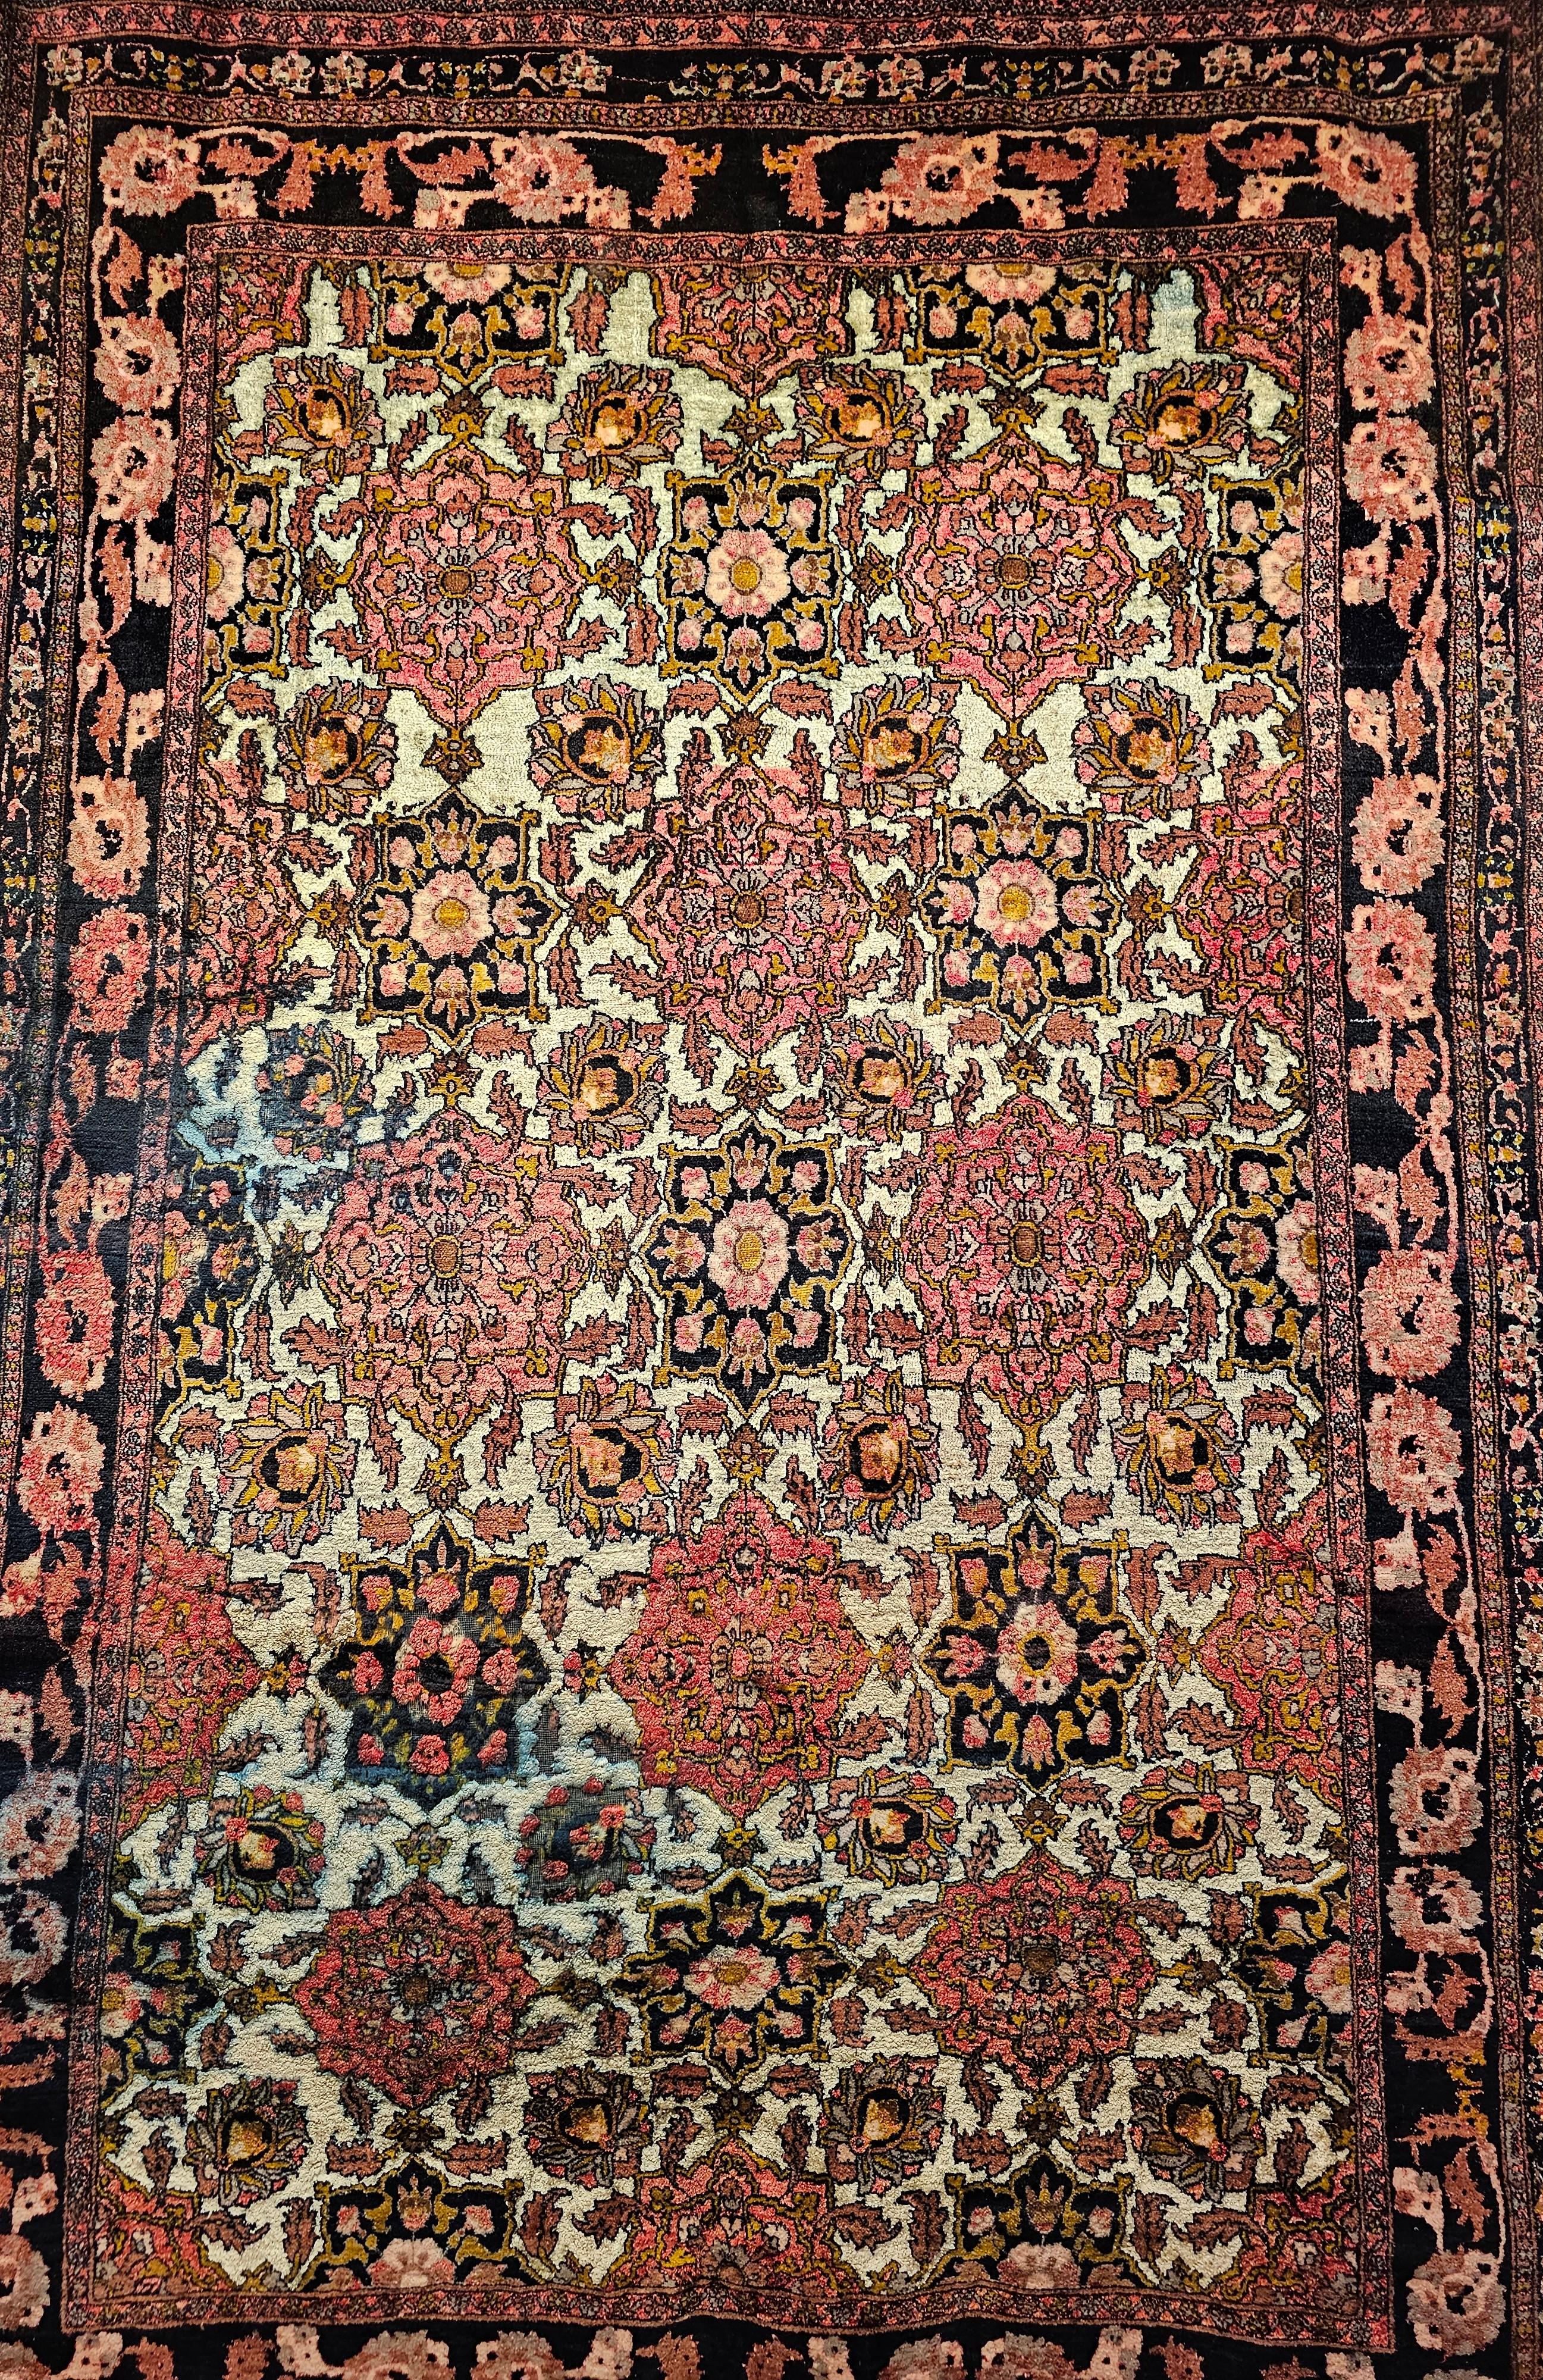 Vintage room-size hand-knotted silk rug from Herat, Afghanistan circa the mid 1900s.  The rug is in an allover pattern consisting of large medallions in red, brown, and black colors.  The medallions show beautifully on a cream-colored silk field. 